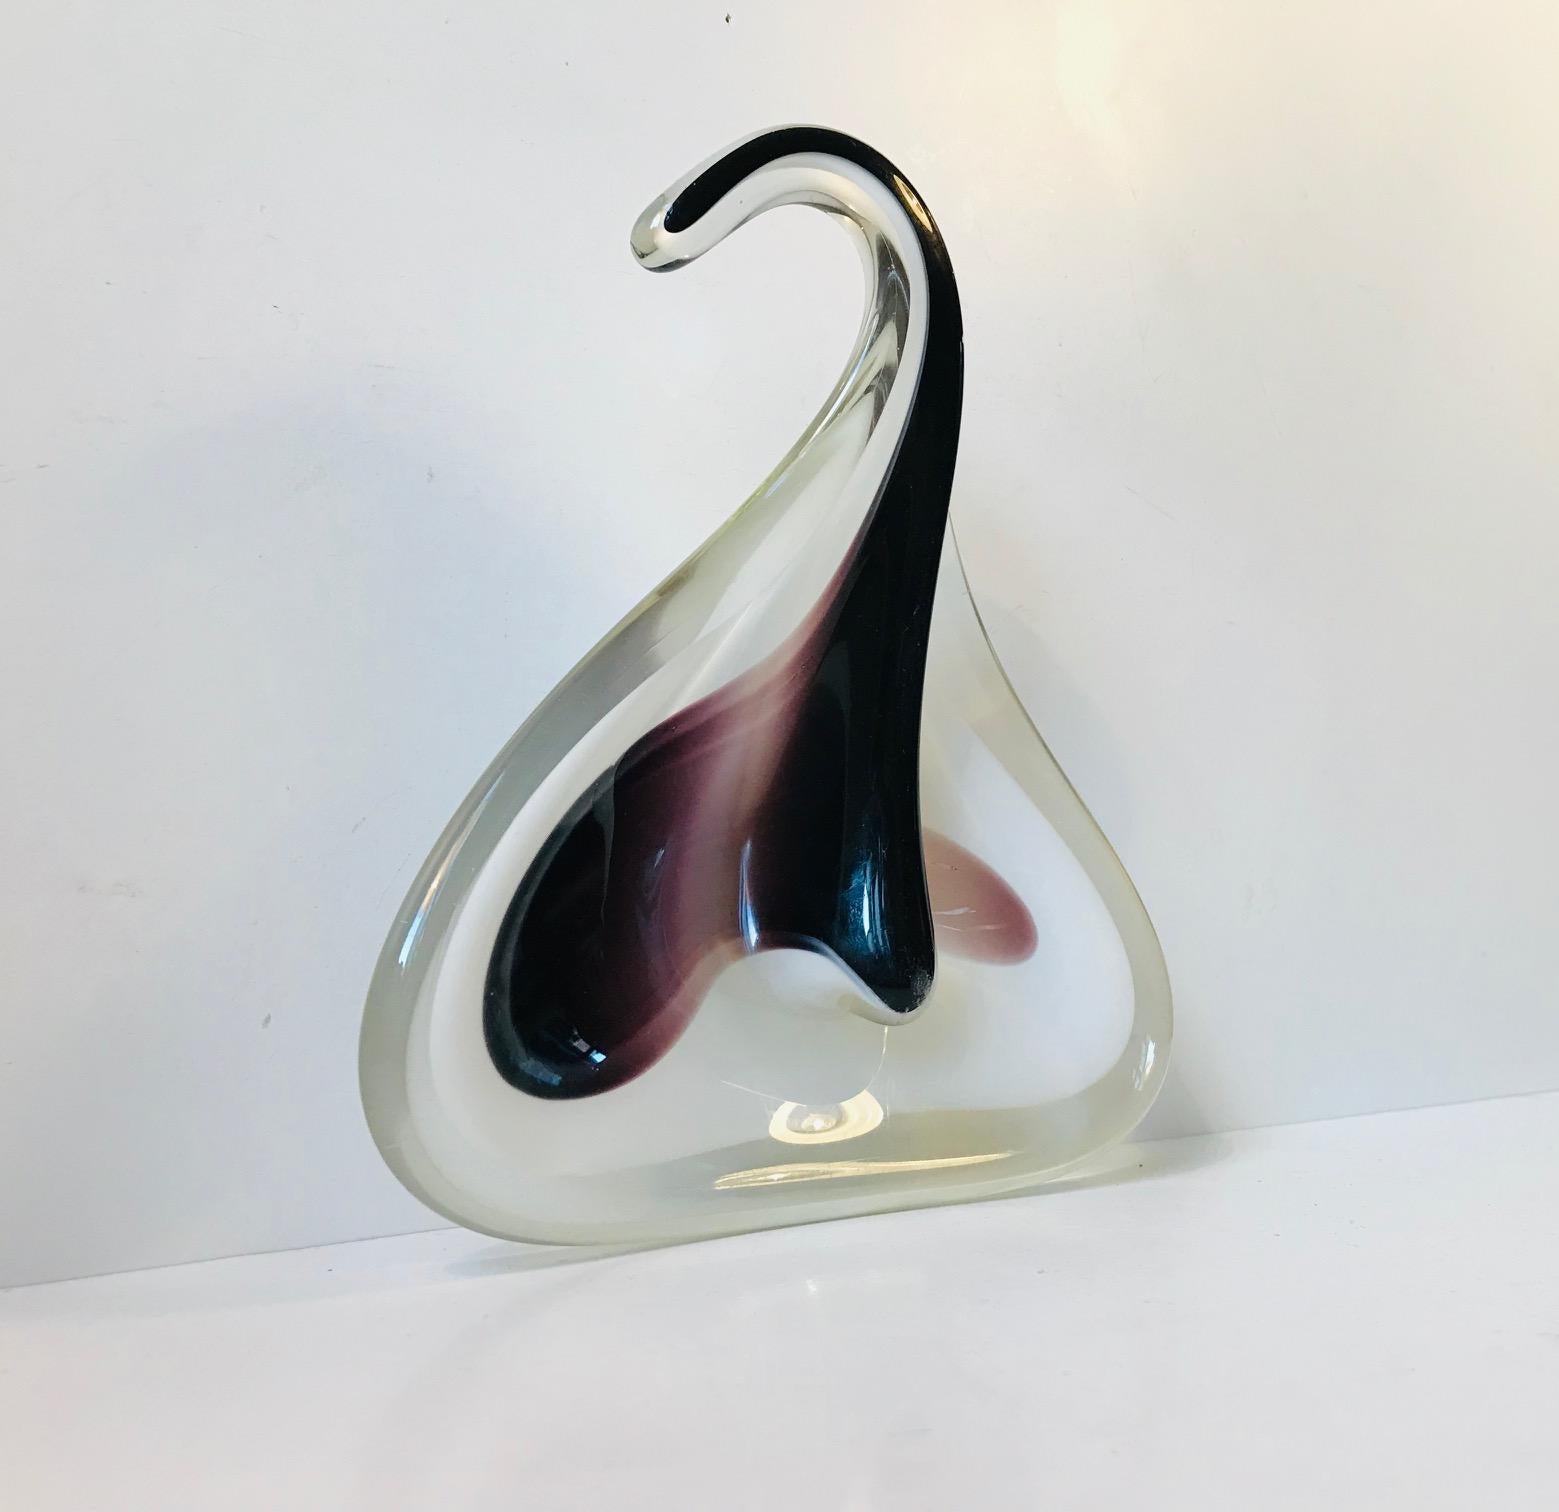 - Art Glass bowl in shape of a Manta Ray
- Designed in 1955 by glassmaker Paul Kedelv 
- Manufactured by Flygfors in Sweden
- The bowl is signed Kedelv to the base and inscribed Flygfors 55.